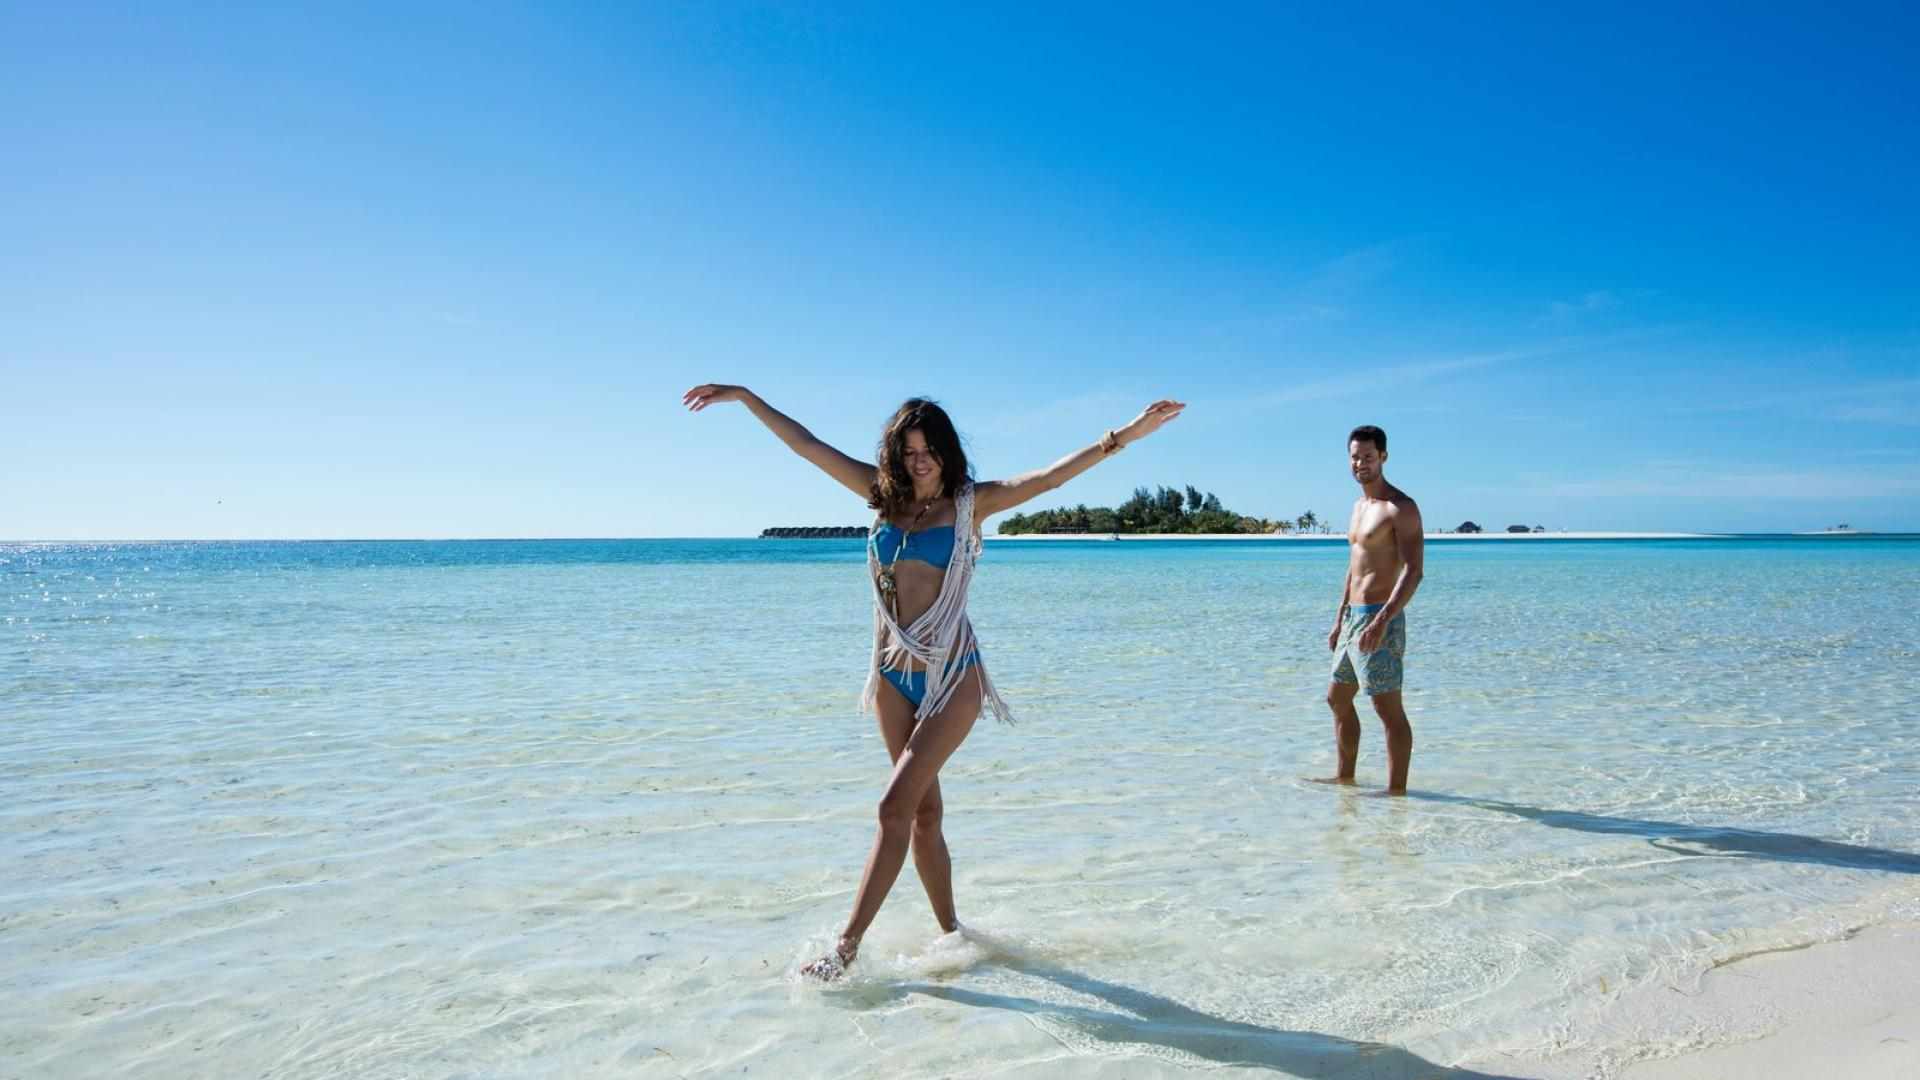 Kanuhura Maldives - offer a unique timeless castaway chic experience